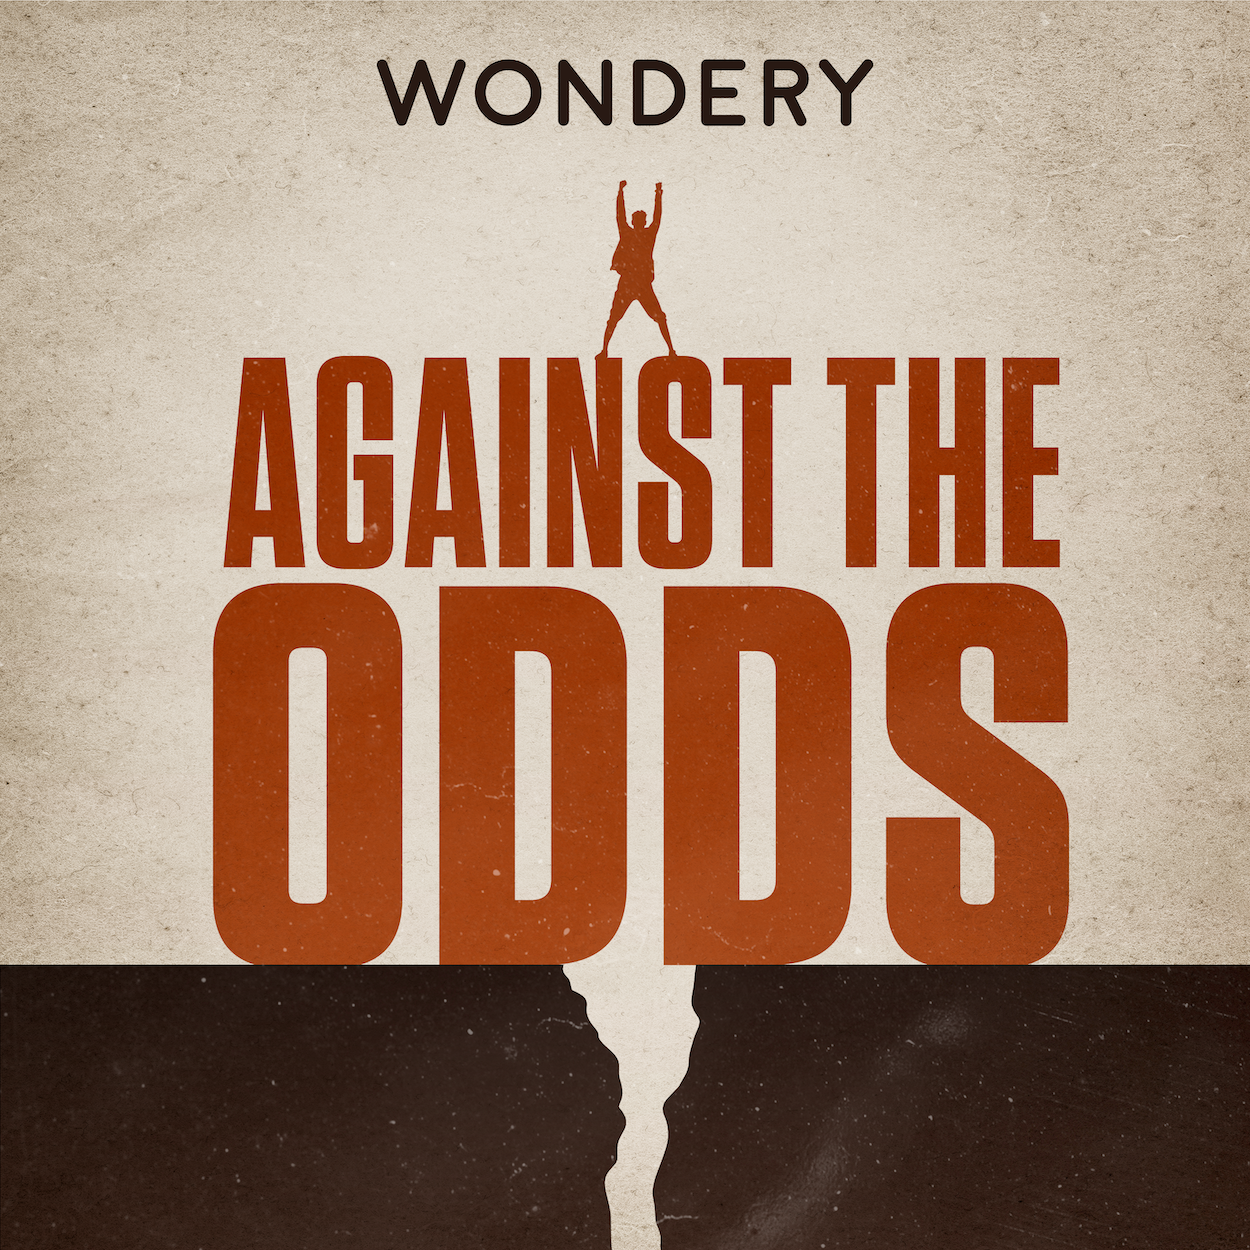 &quot;Against the Odds&quot; written above an illustrated cliff